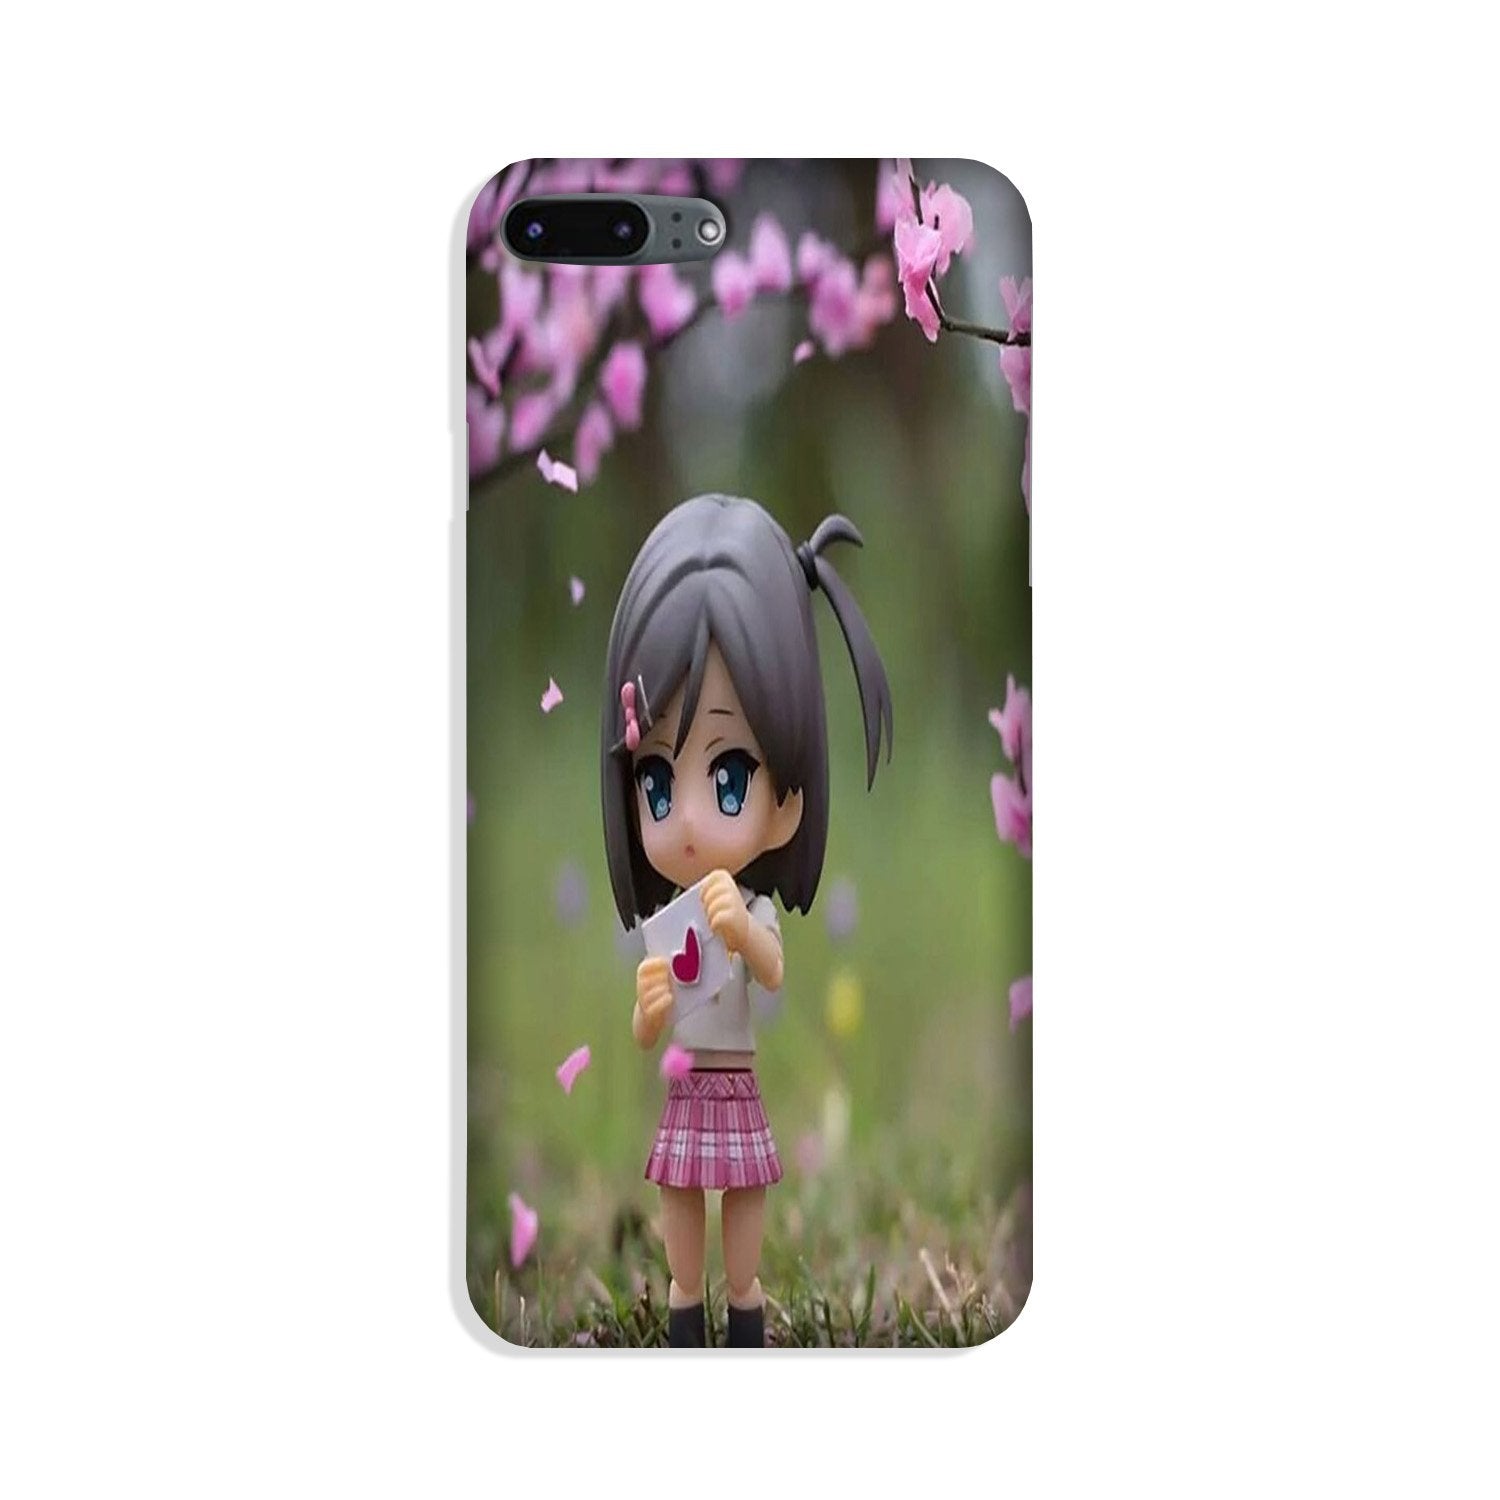 Cute Girl Case for iPhone 8 Plus